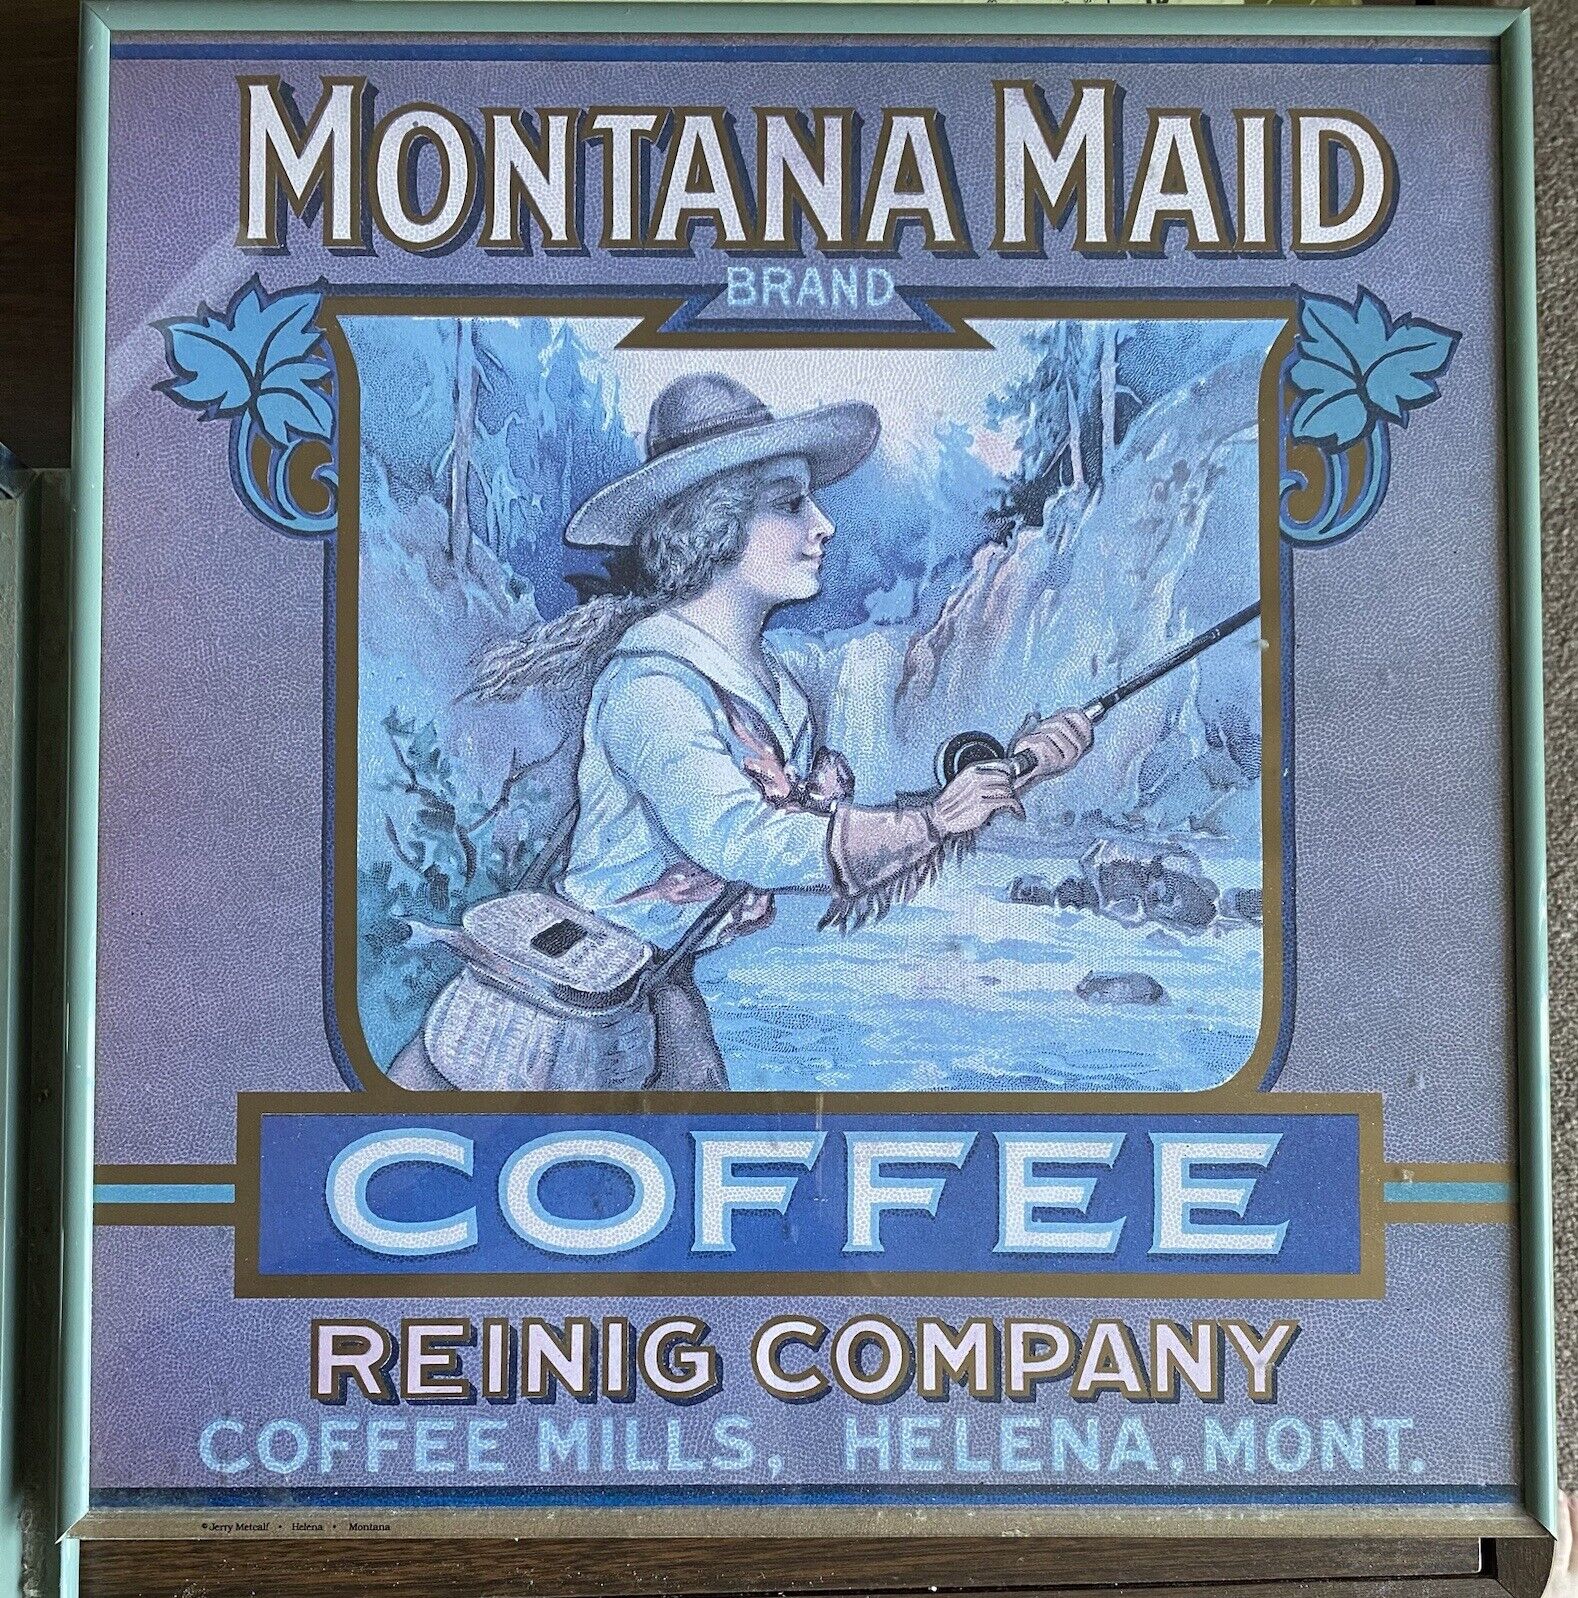 Vintage 1970s MONTANA MAID COFFEE Ad Cardstock Framed Poster Jerry Metcalf